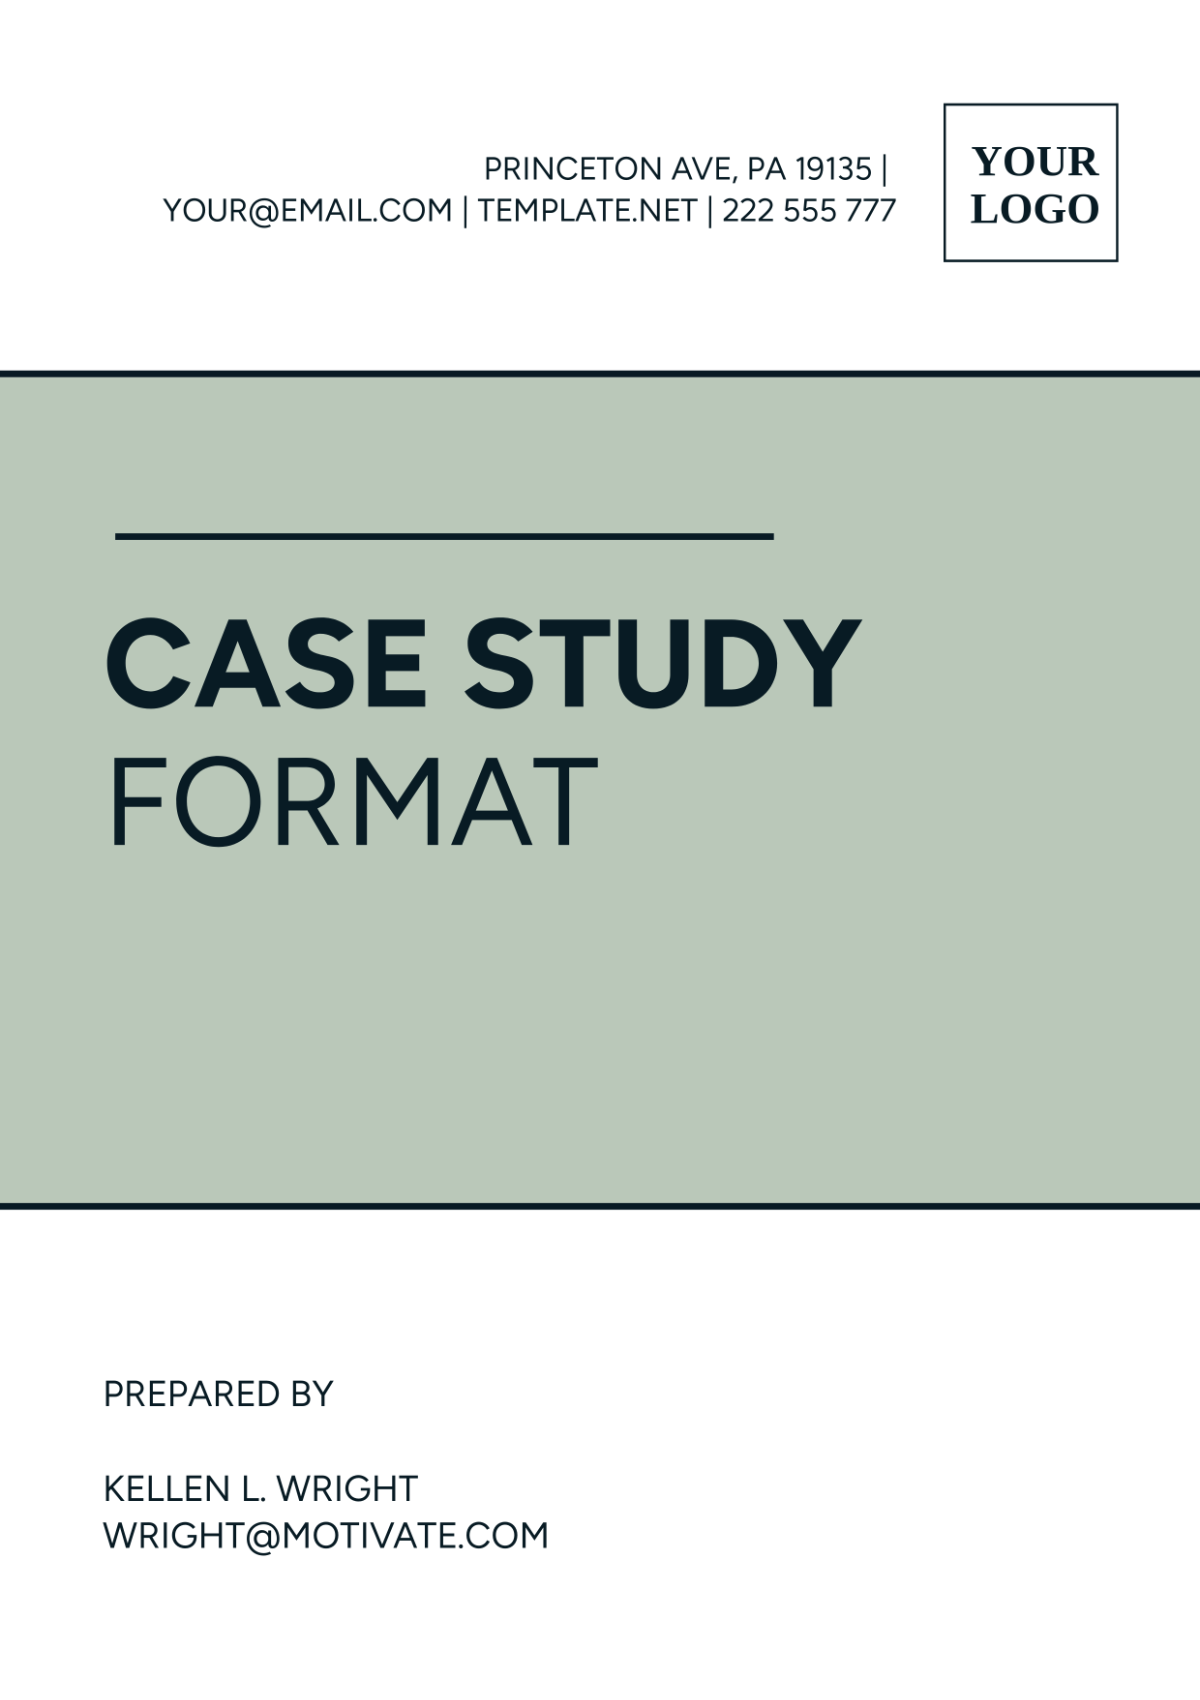 Case Study Format Template